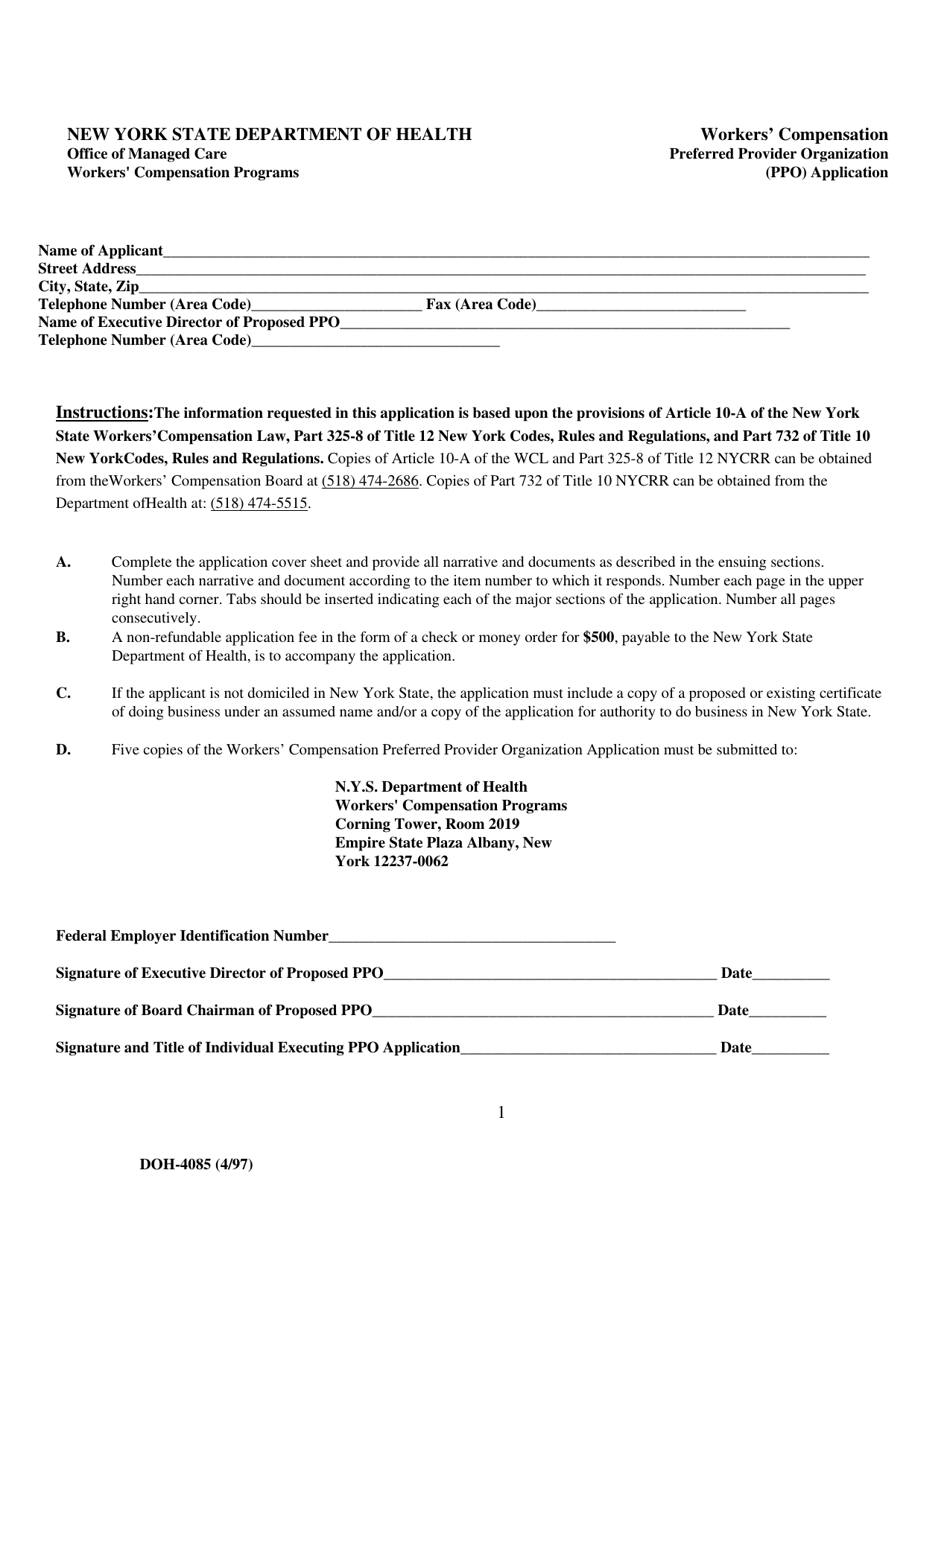 Form DOH-485 Workers Compensation Preferred Provider Organization (Ppo) Application - New York, Page 1